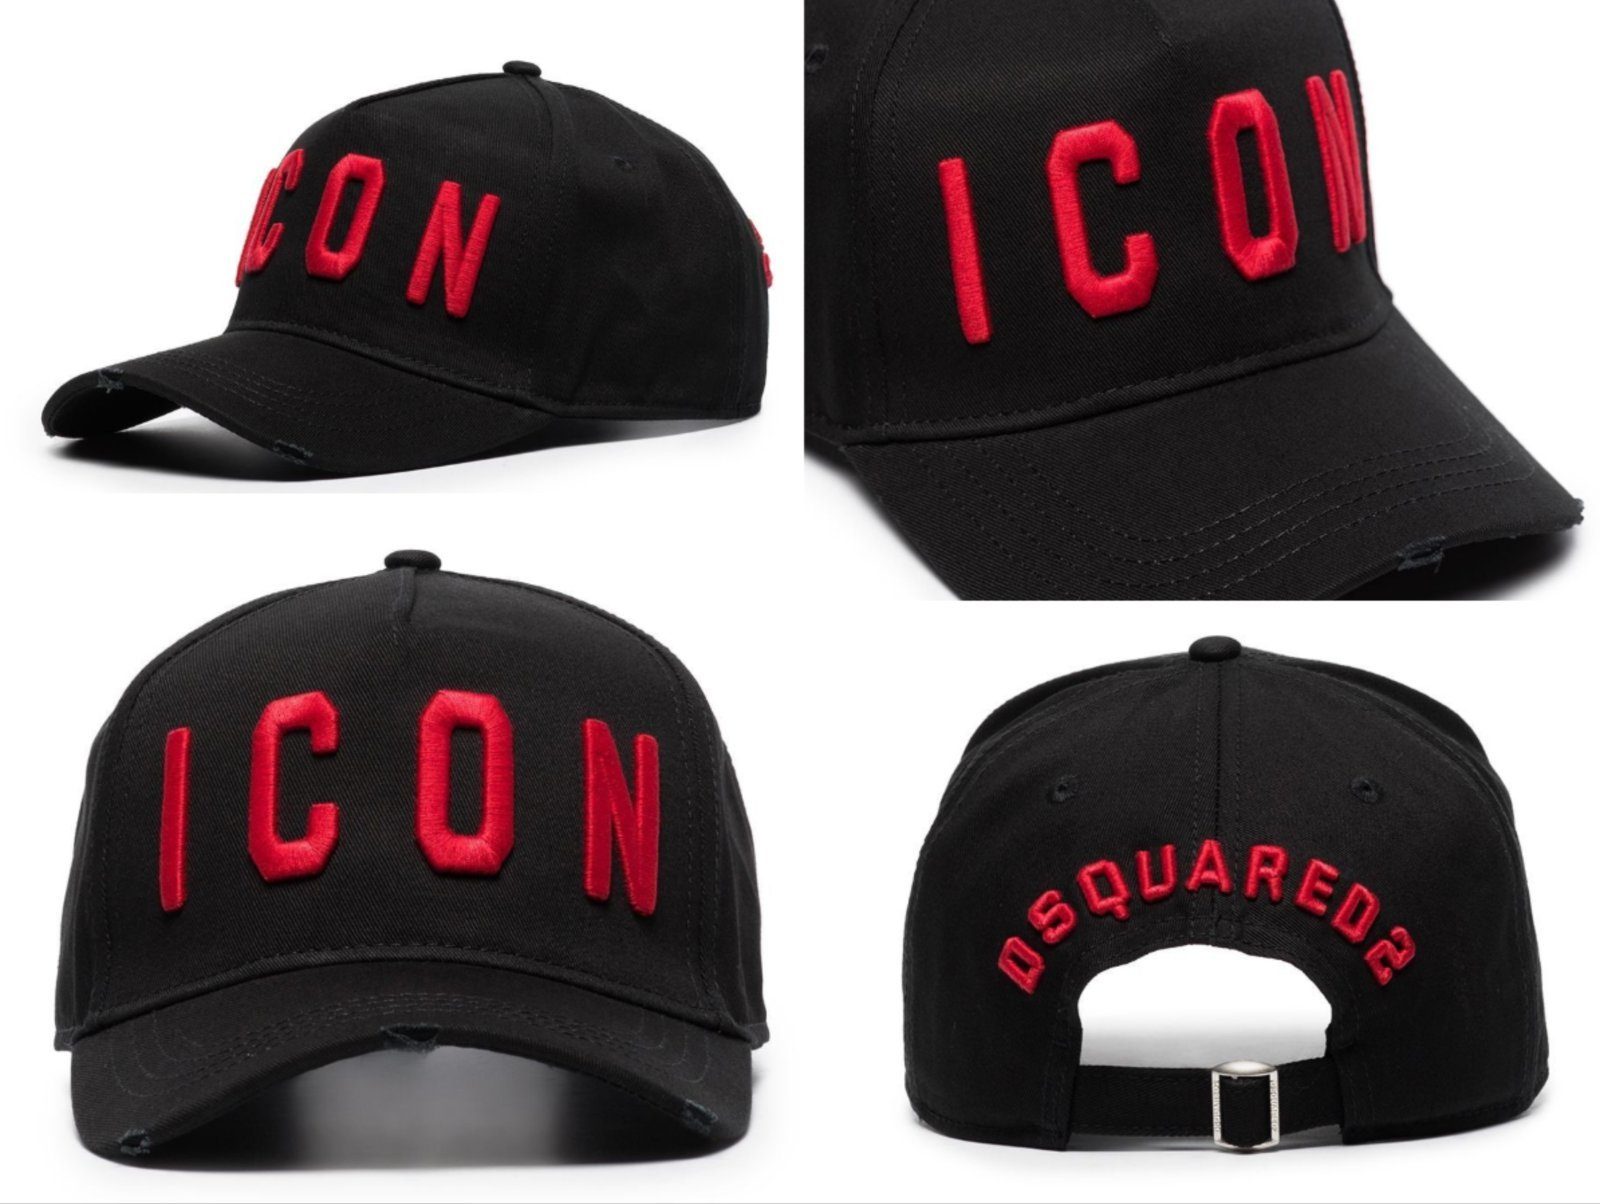 Dsquared2 Baseball Cap DSQUARED2 ICON LOGO BLACK HAT BASEBALL CAP EMBROIDERED VINTAGE CAPPY